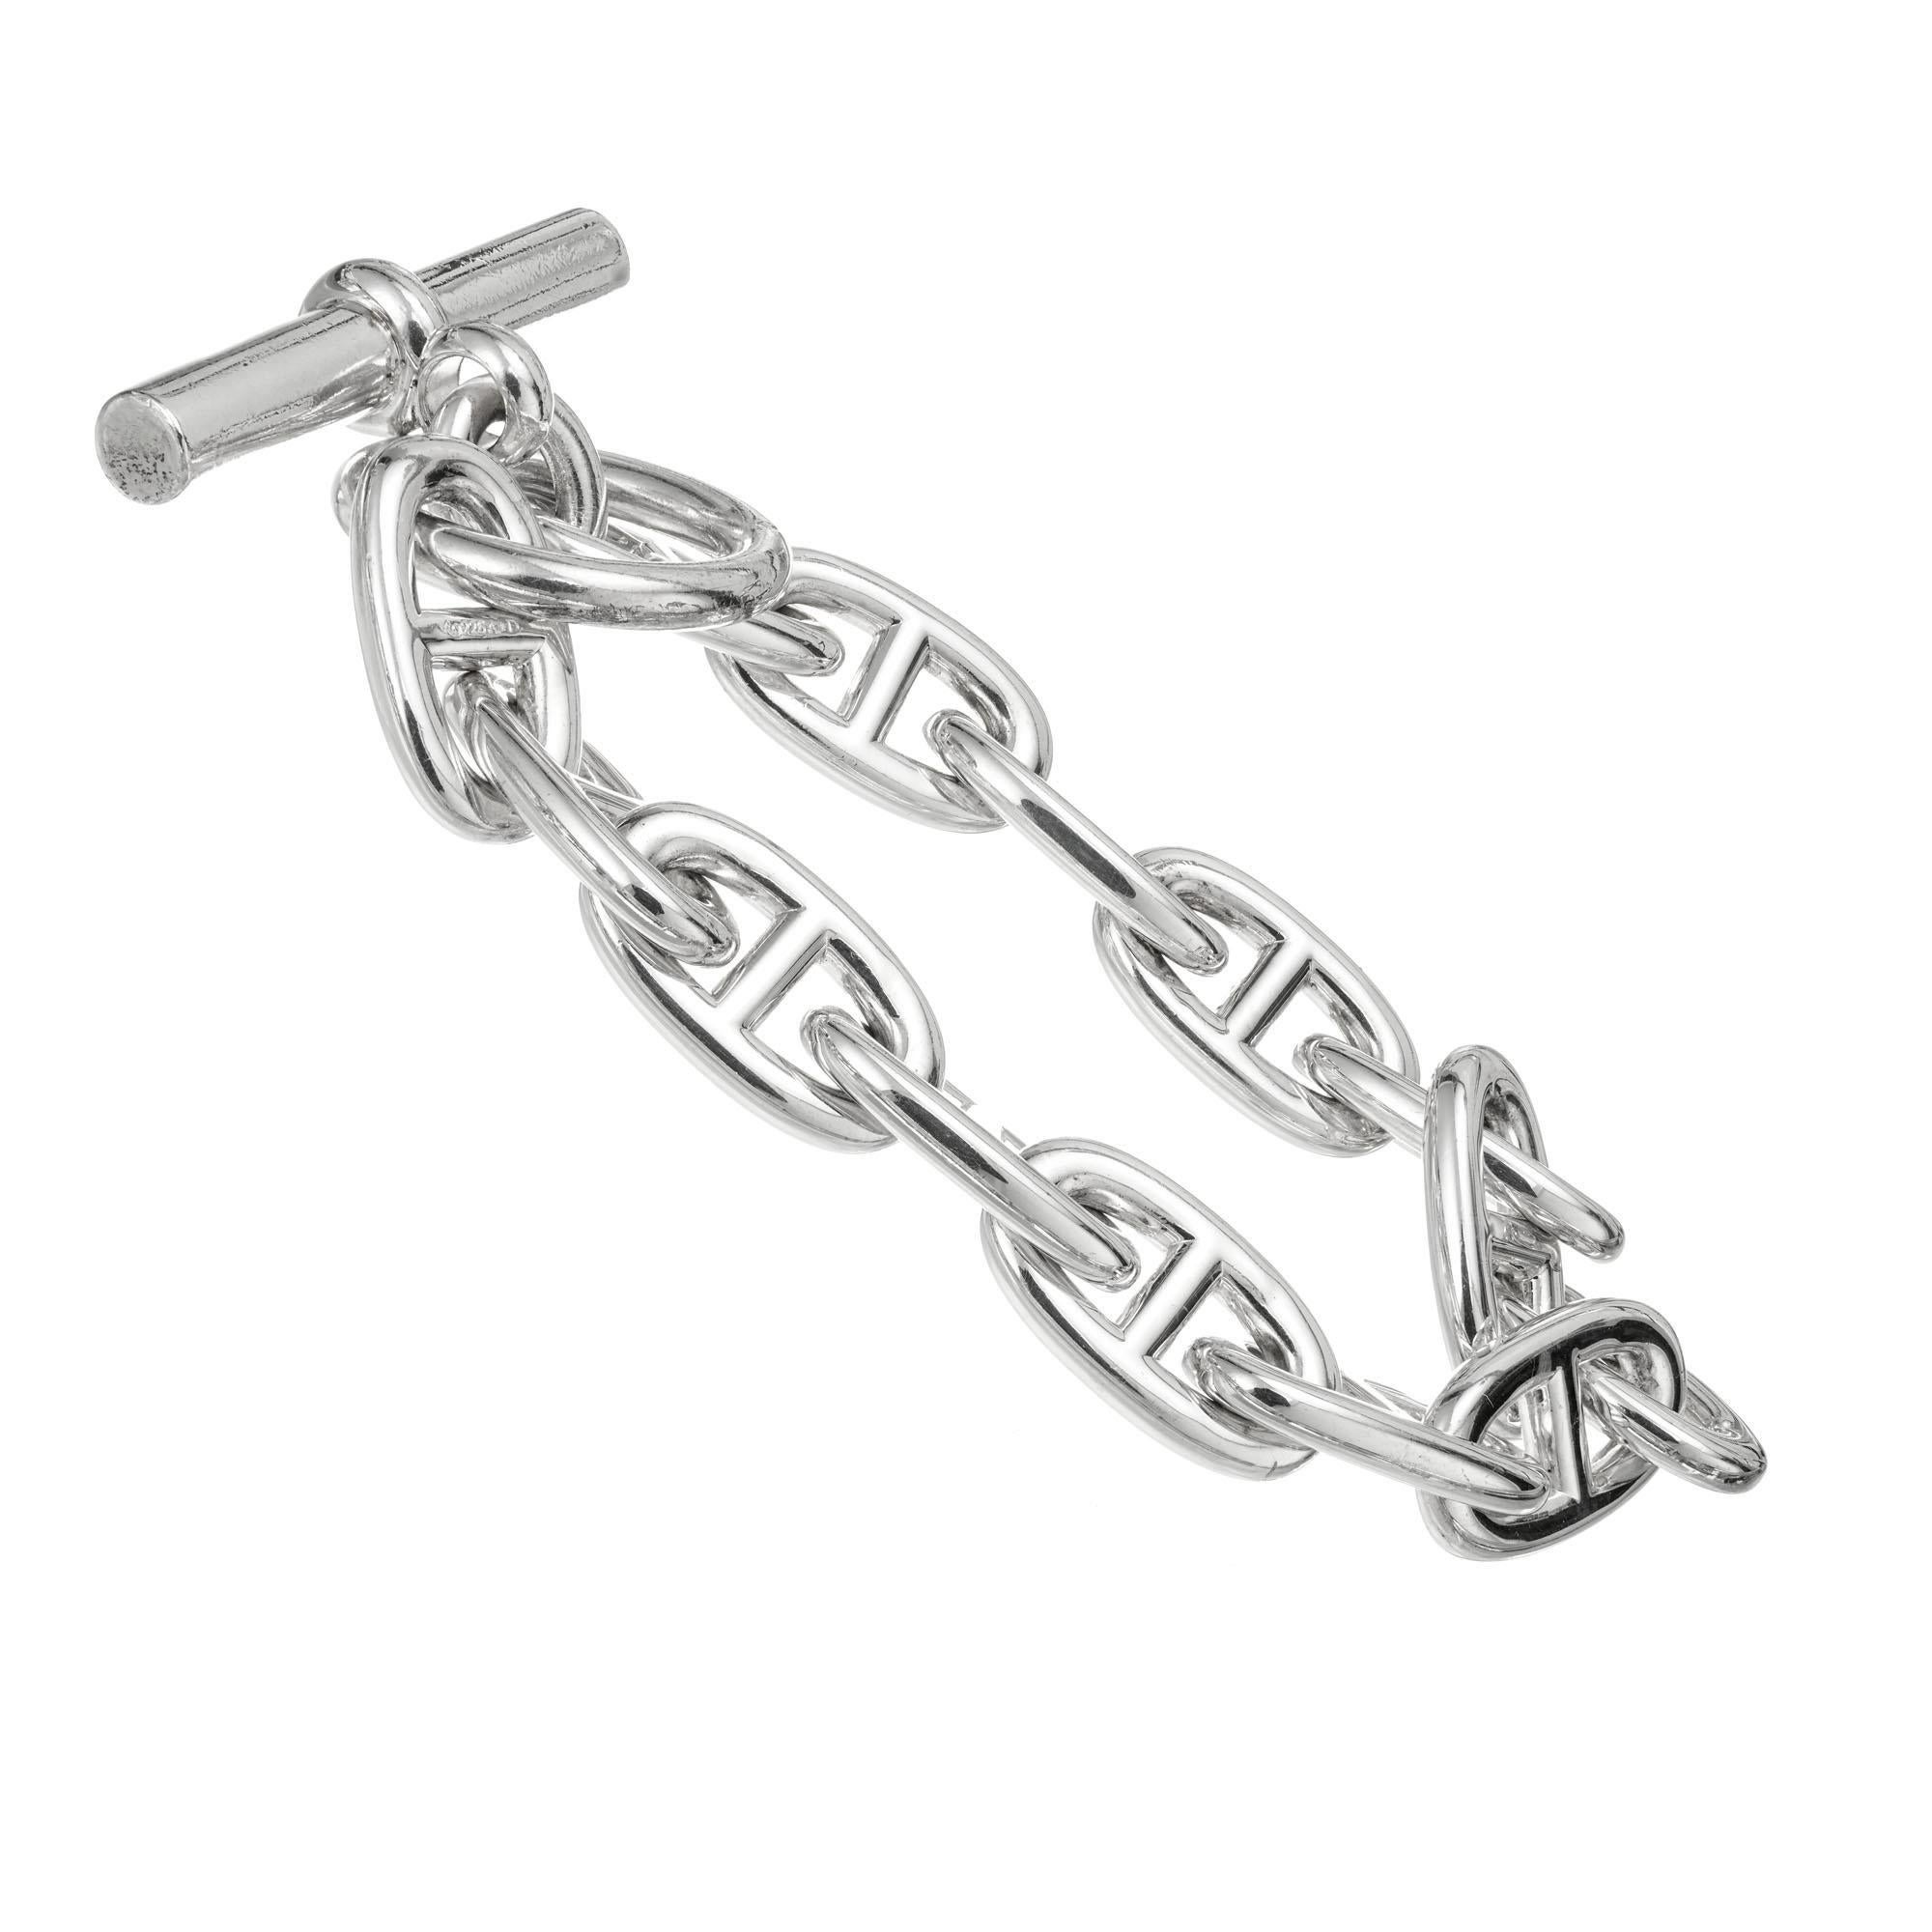 Hermes D'ancre silver toggle link bracelet. 8 Inches in length. Large size. 

Sterling Silver
Stamped: AG 925
Hallmark: Hermes 
72.6 grams
Bracelet: 8 Inches
Width: 11.4mm
Thickness/depth: 3.0mm
